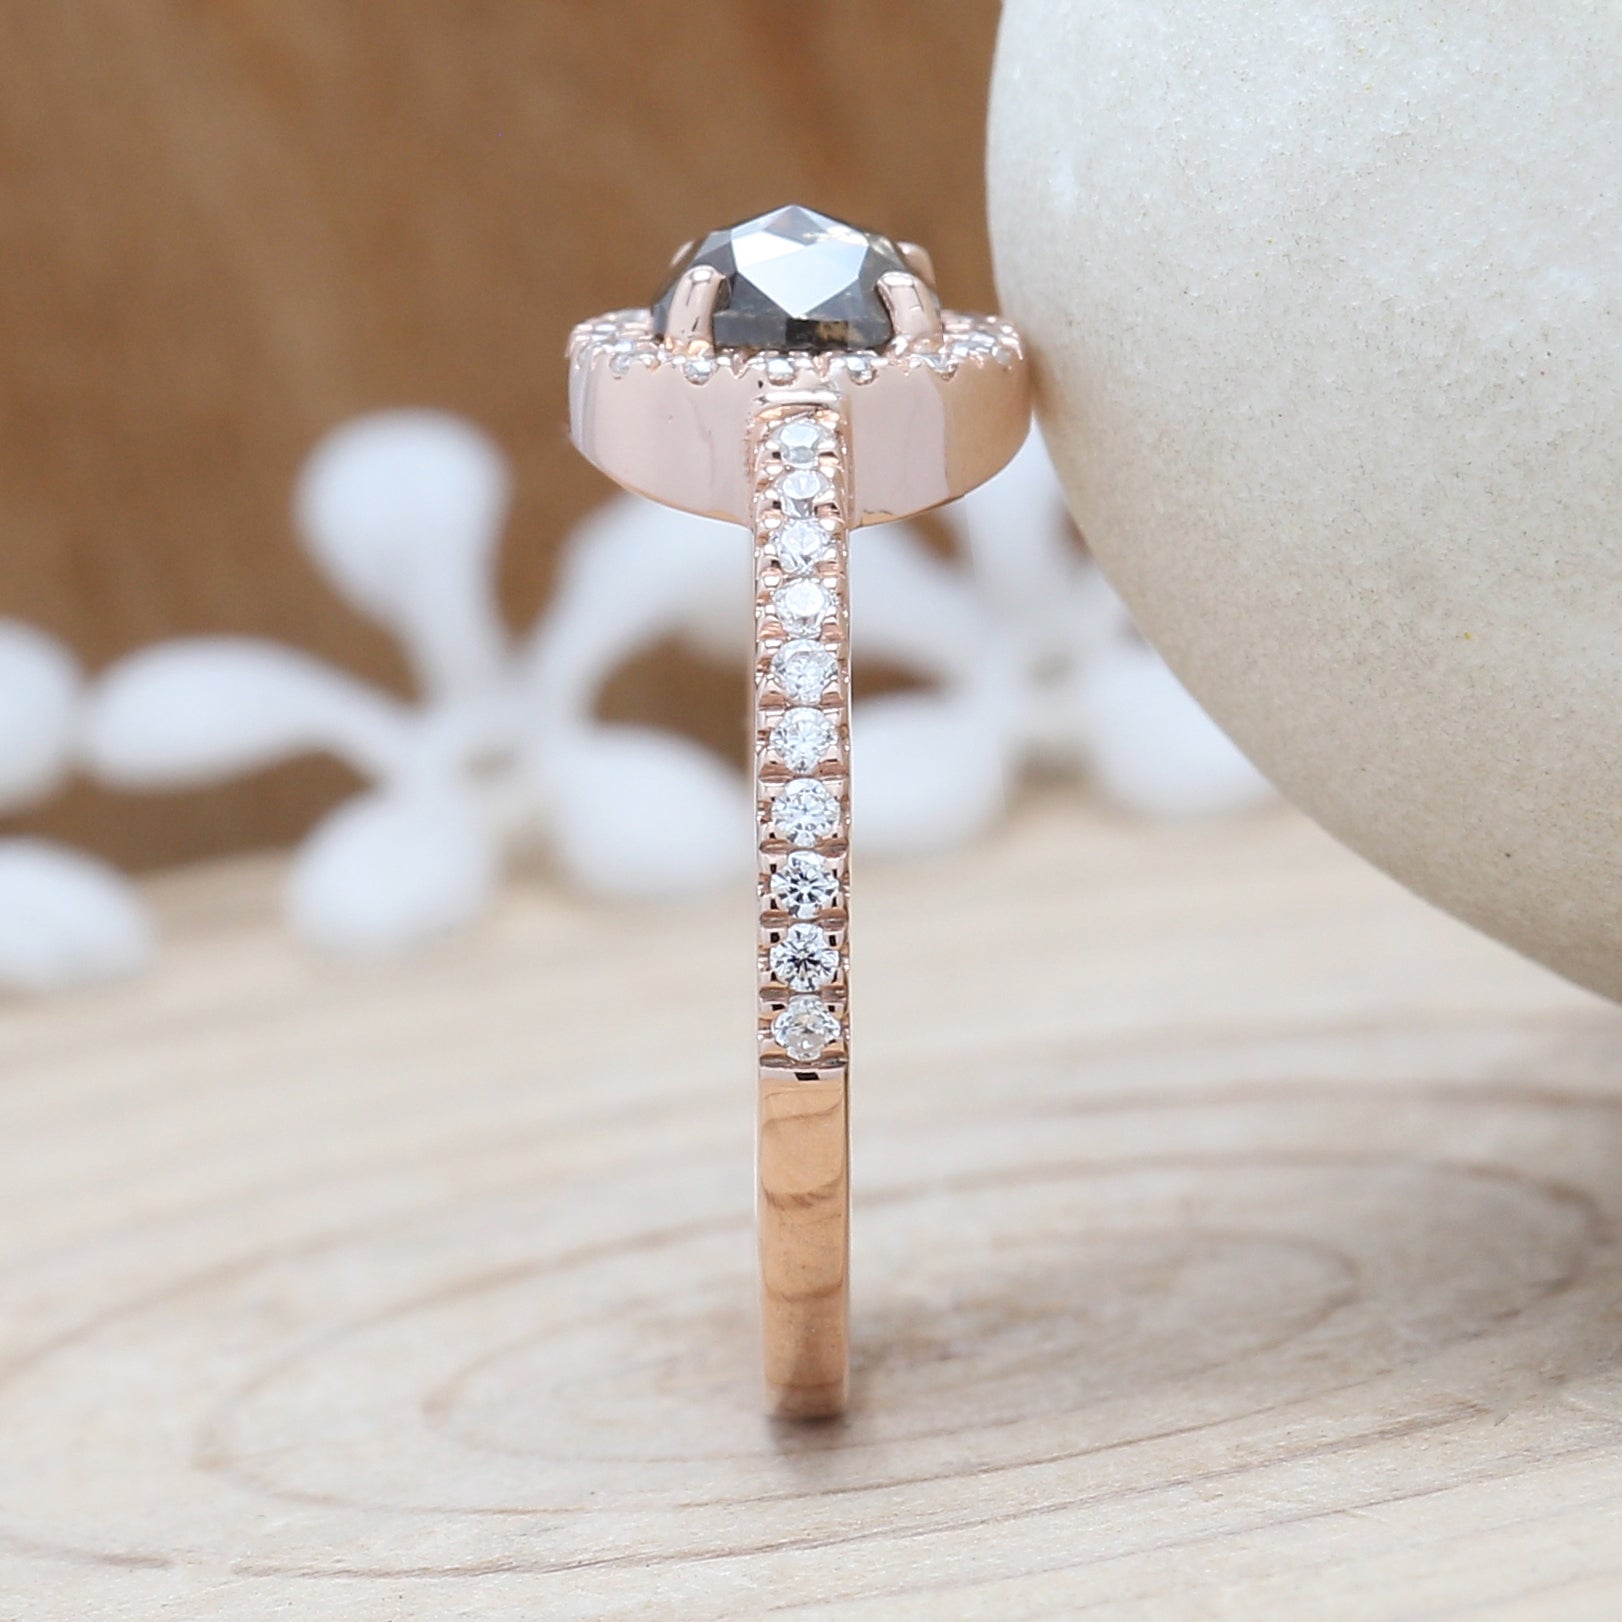 0.85 Ct Natural Cushion Cut Salt And Pepper Diamond Ring 5.35 MM Cushion Shape Diamond Ring 14K Solid Rose Gold Silver Engagement Ring QN709